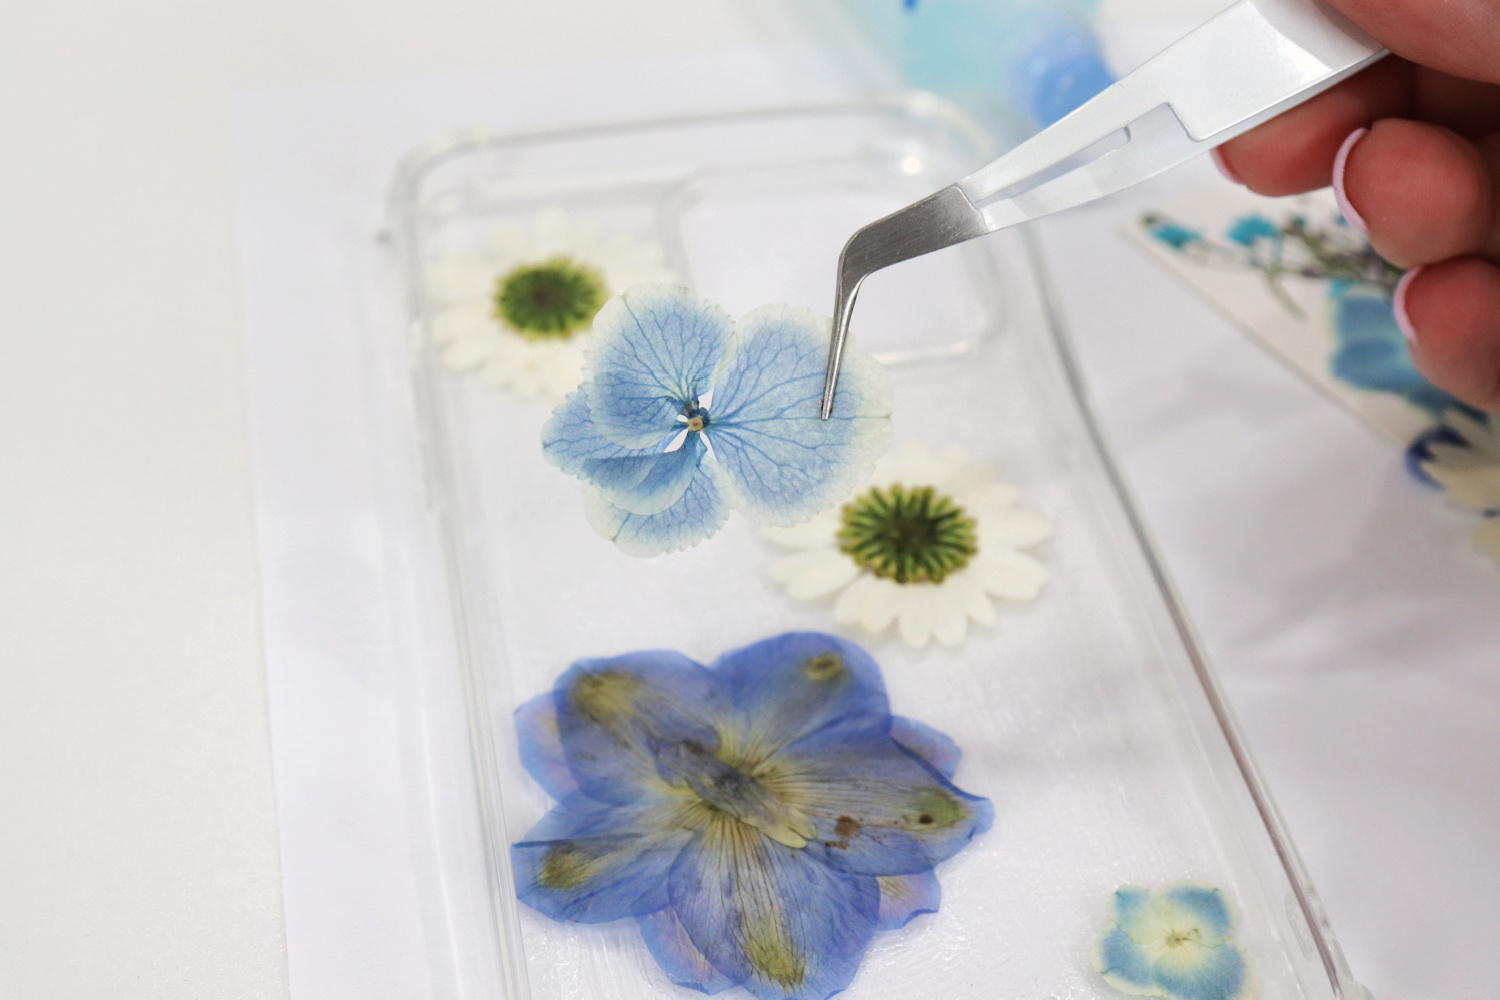 Image contains Amy’s hand holding a pair of white-handled tweezers that have a blue pressed flower in the tip. Below the flower is a clear phone case with a variety of white and blue flowers placed face down on top.